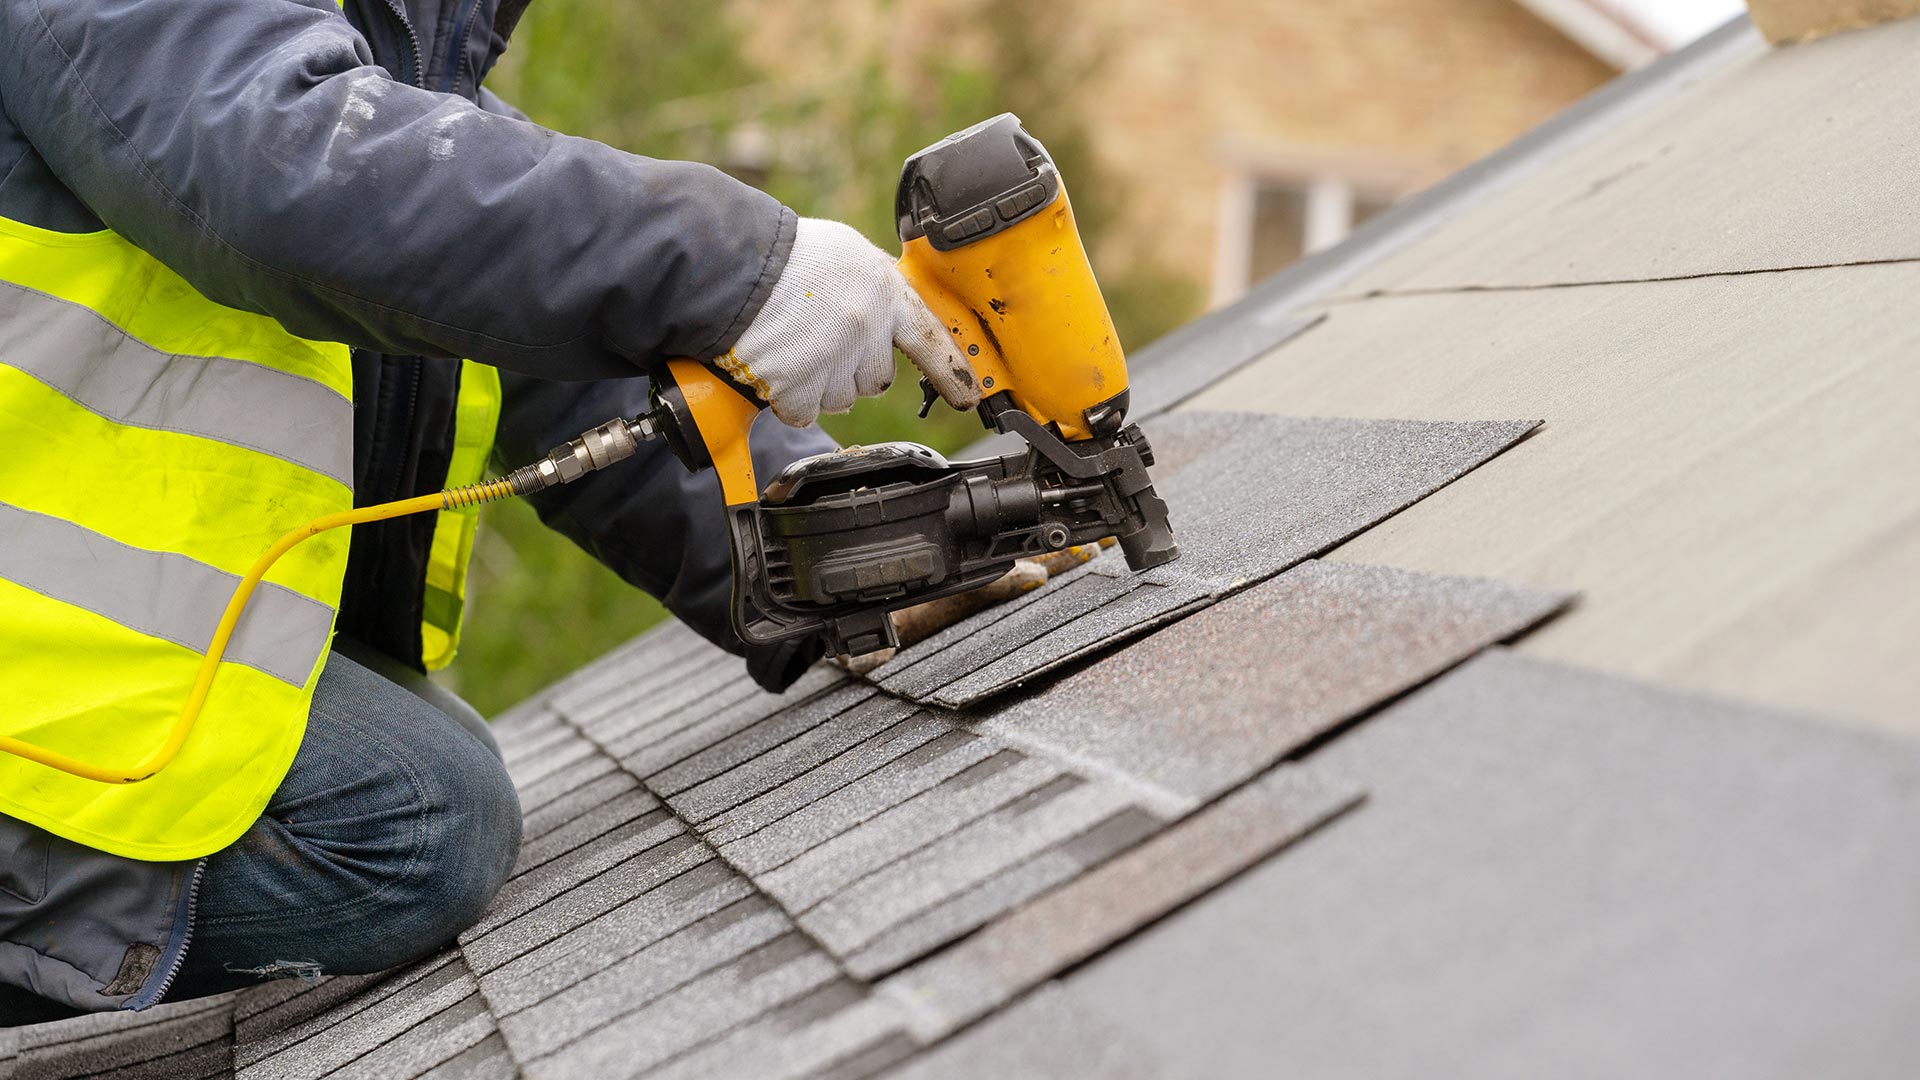 roofer-close-up-with-protection-equipment-and-nailgun-installing-asphalt-shingles-roof-longview-tx